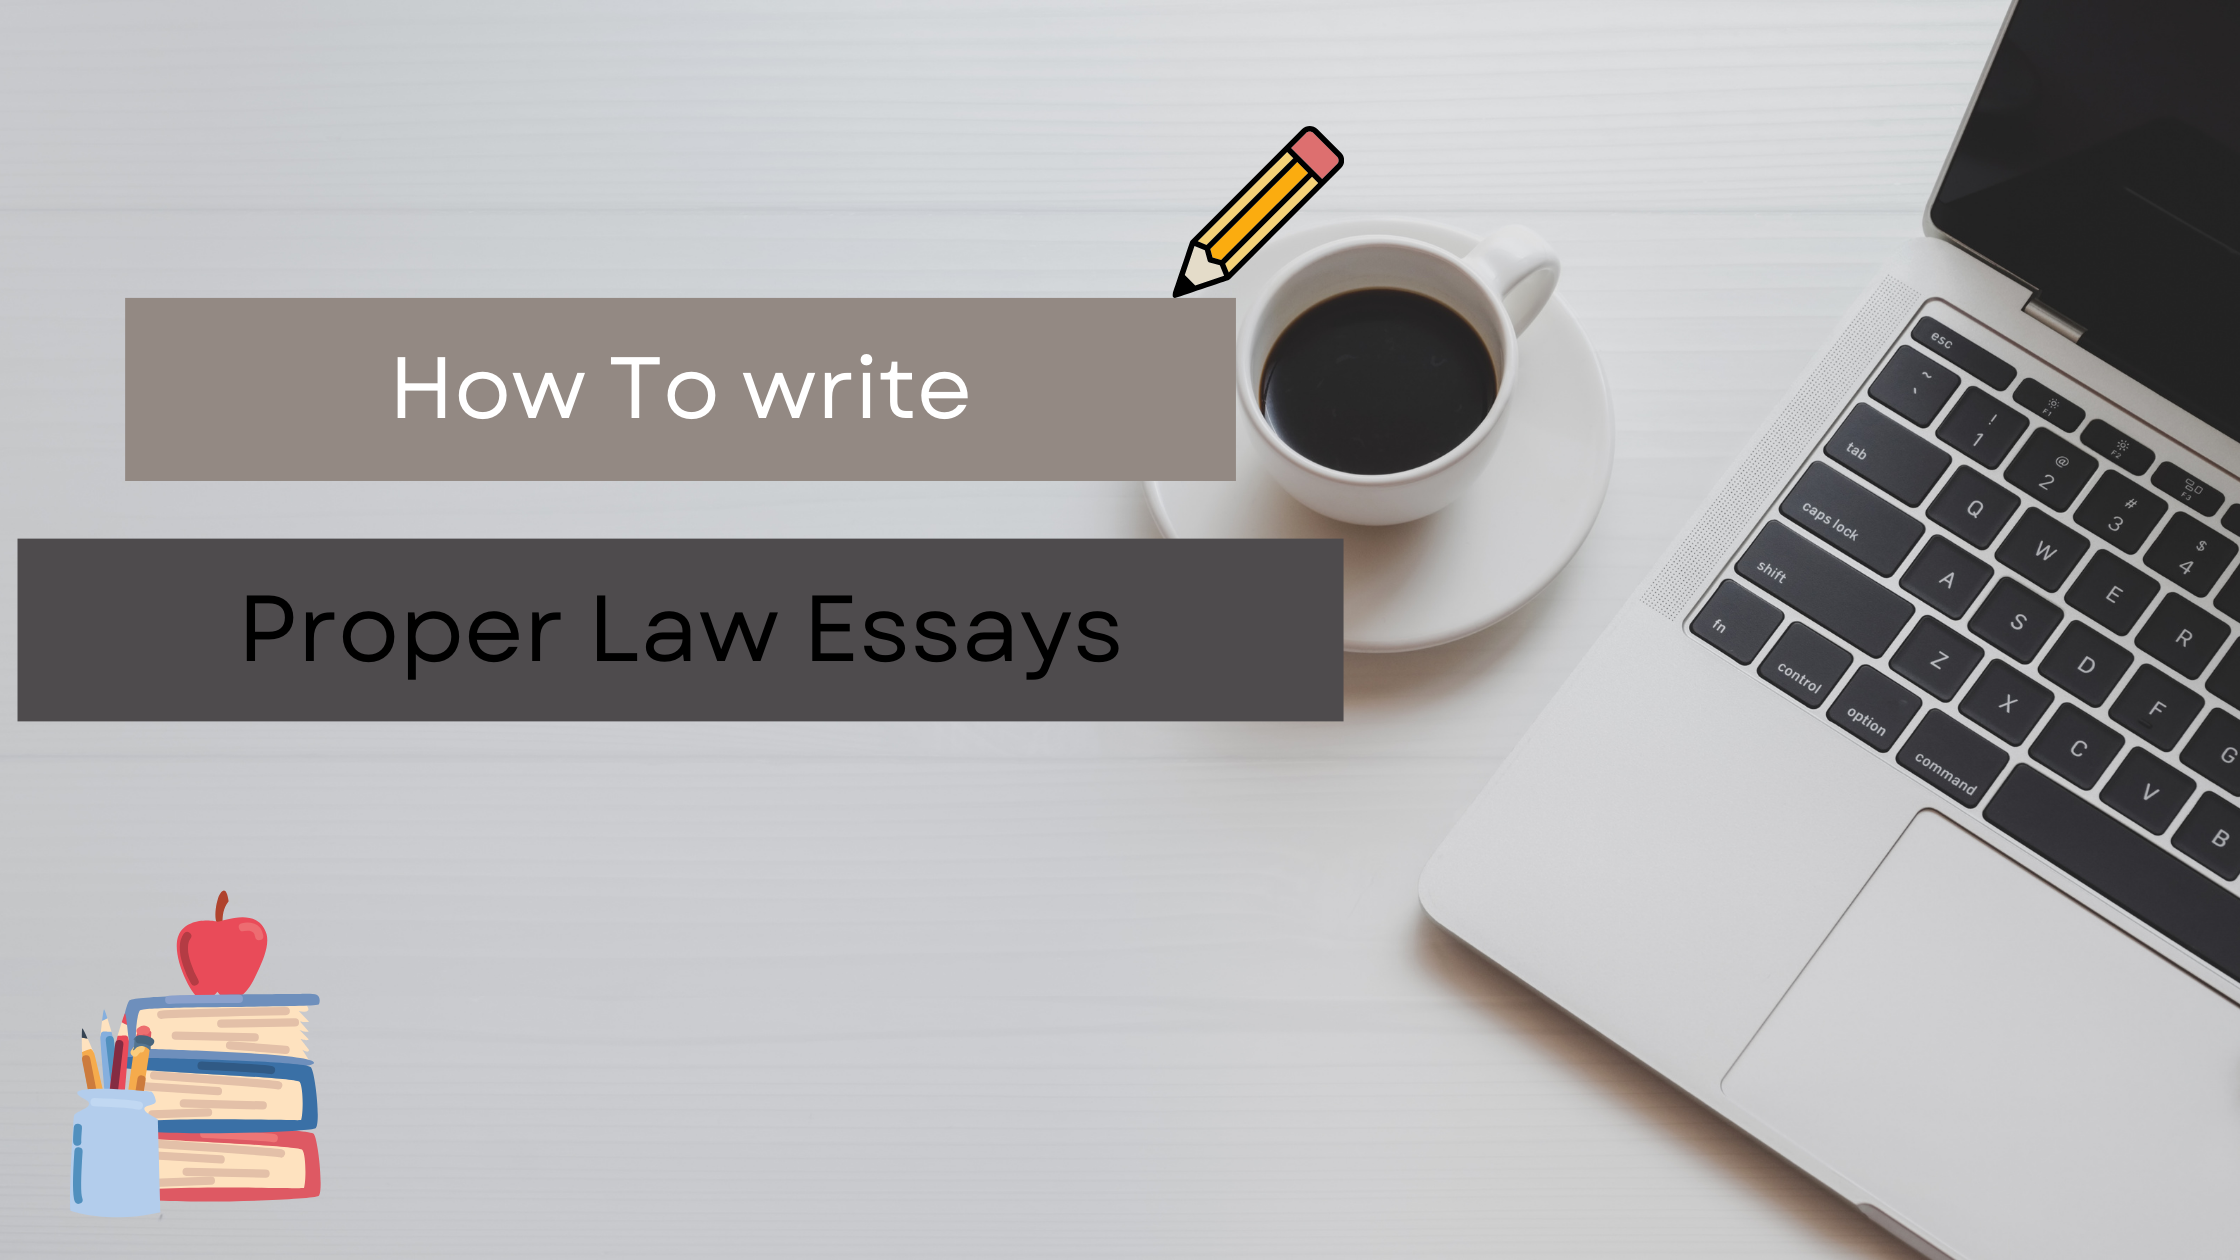 How to Write Proper Law Essays